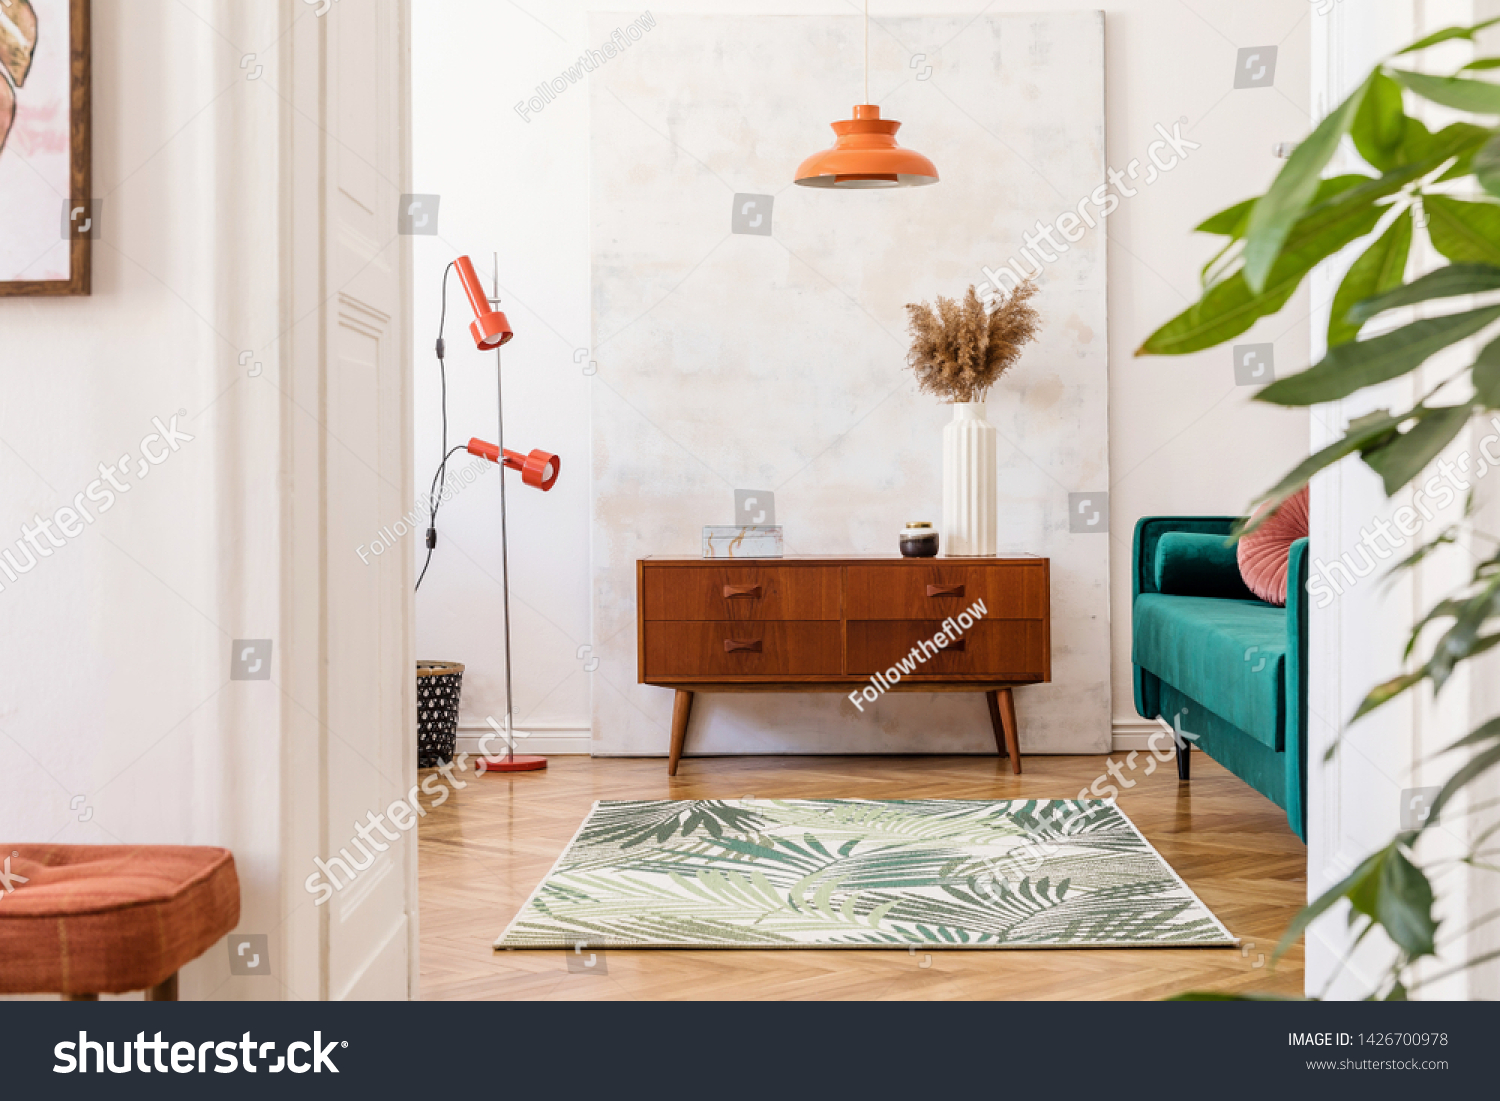 Stylish compositon of retro home interior with vintage cupboard, velvet sofa, flowers in vase, design orange lamps , elegant accessories and abstract paintings. Minimalistic concept. Nice home decor.  #1426700978